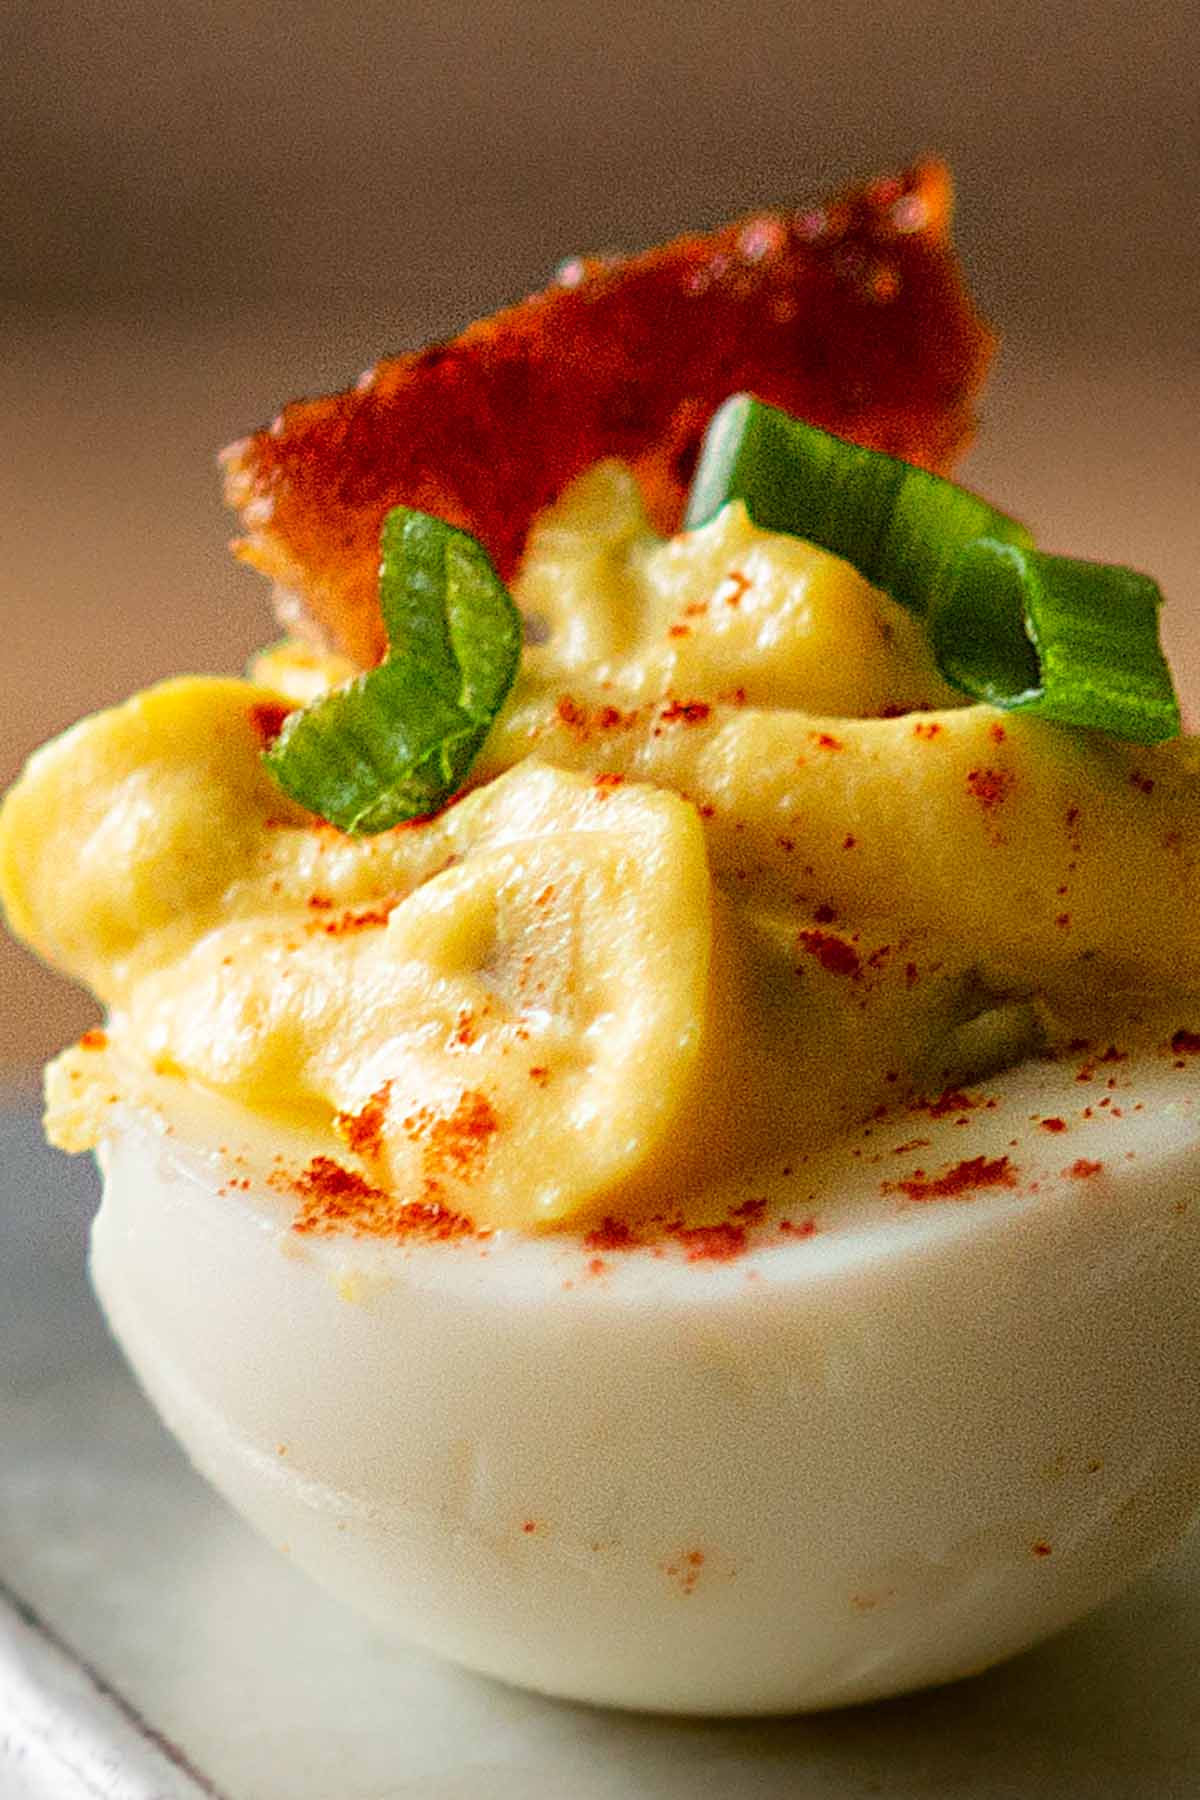 Deviled egg topped with a piece of Jalapeño Bacon and sliced green onions.